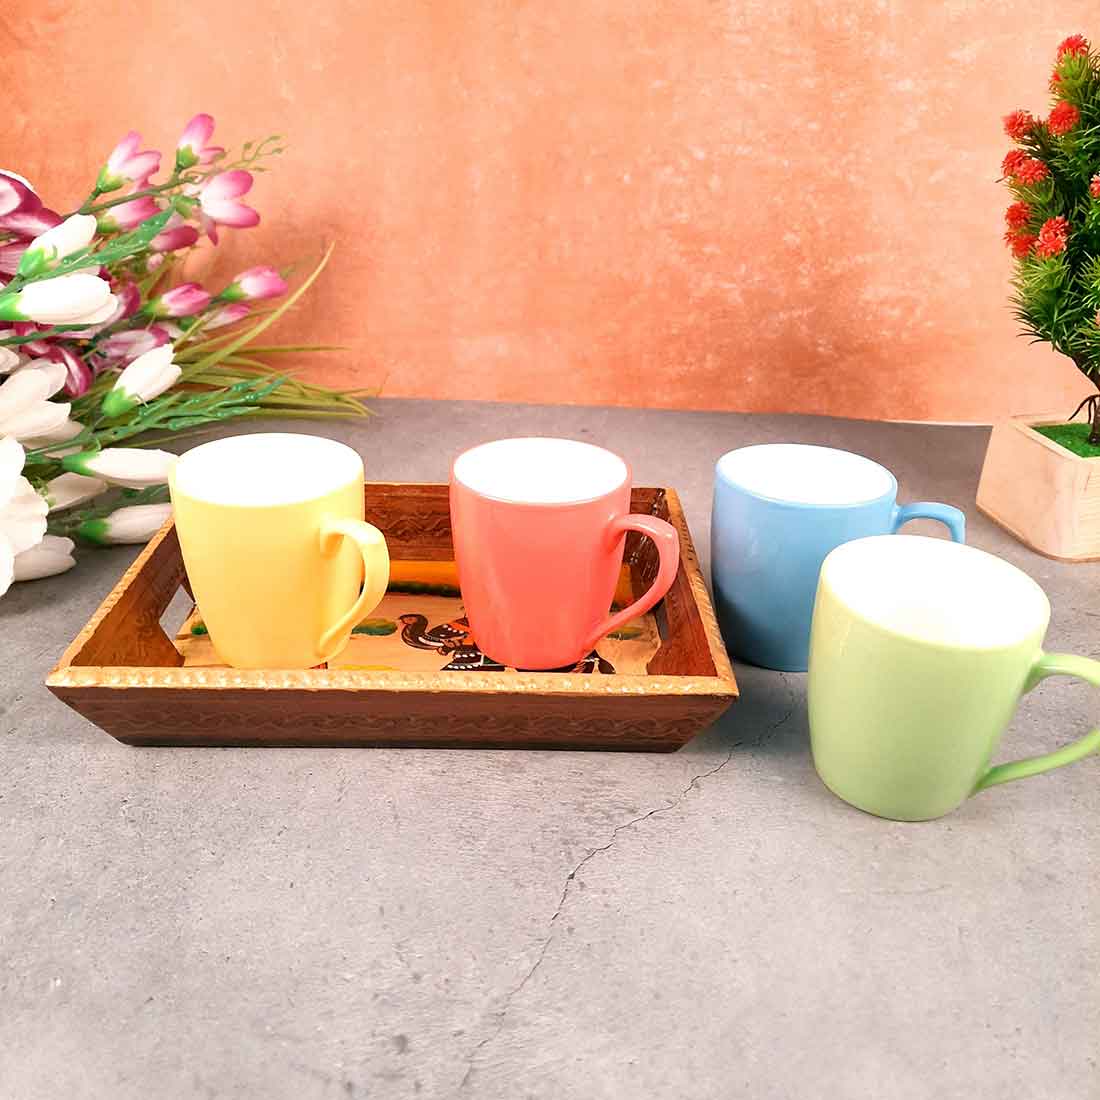 Decorative Tray | Wooden Serving Tray - For Tea & Snack Serving and Organising - 9 Inch - Apkamart#Style_Pack of 1